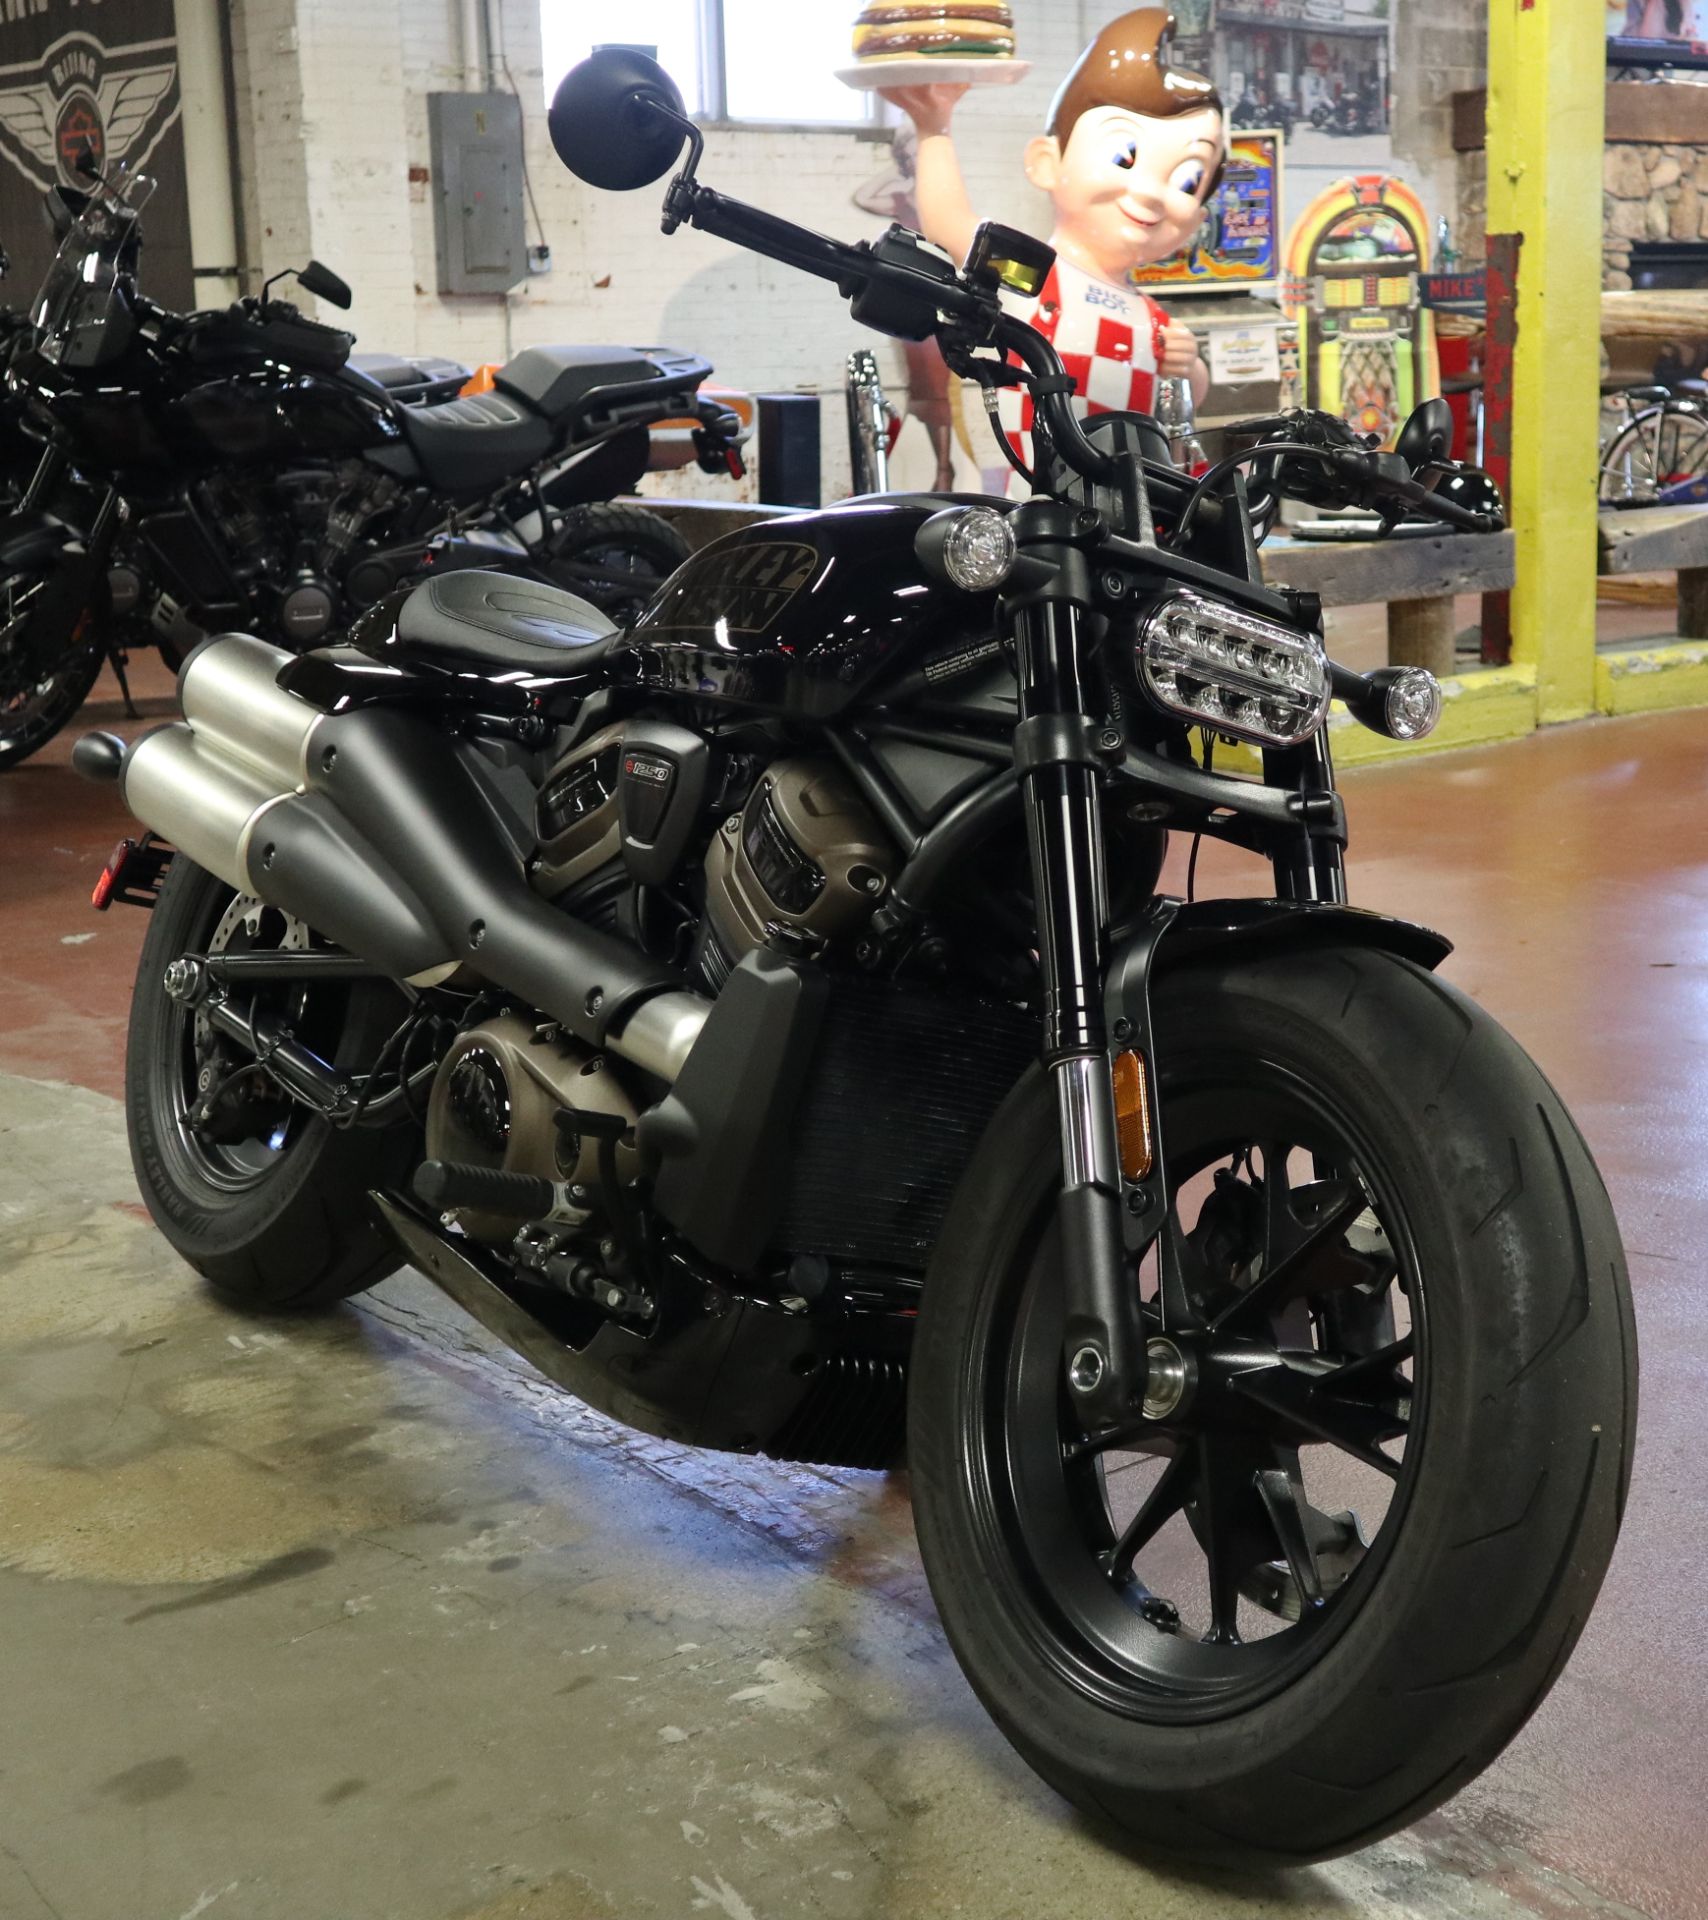 2021 Harley-Davidson Sportster® S in New London, Connecticut - Photo 2